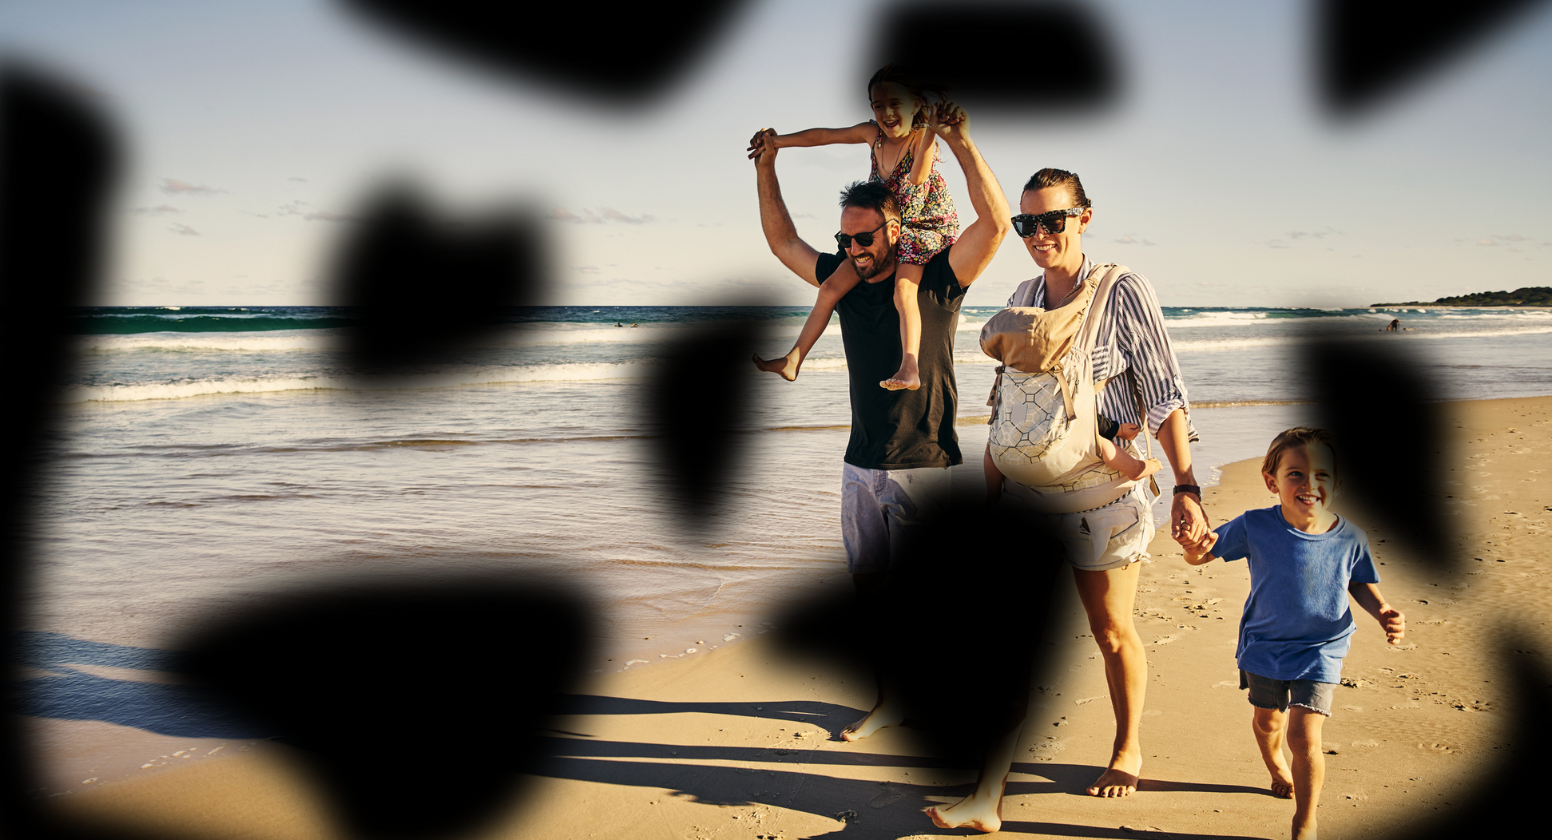 Diabetic retinopathy: Image of a happy family walking on the beach with dark blurred spots across various parts of the image.